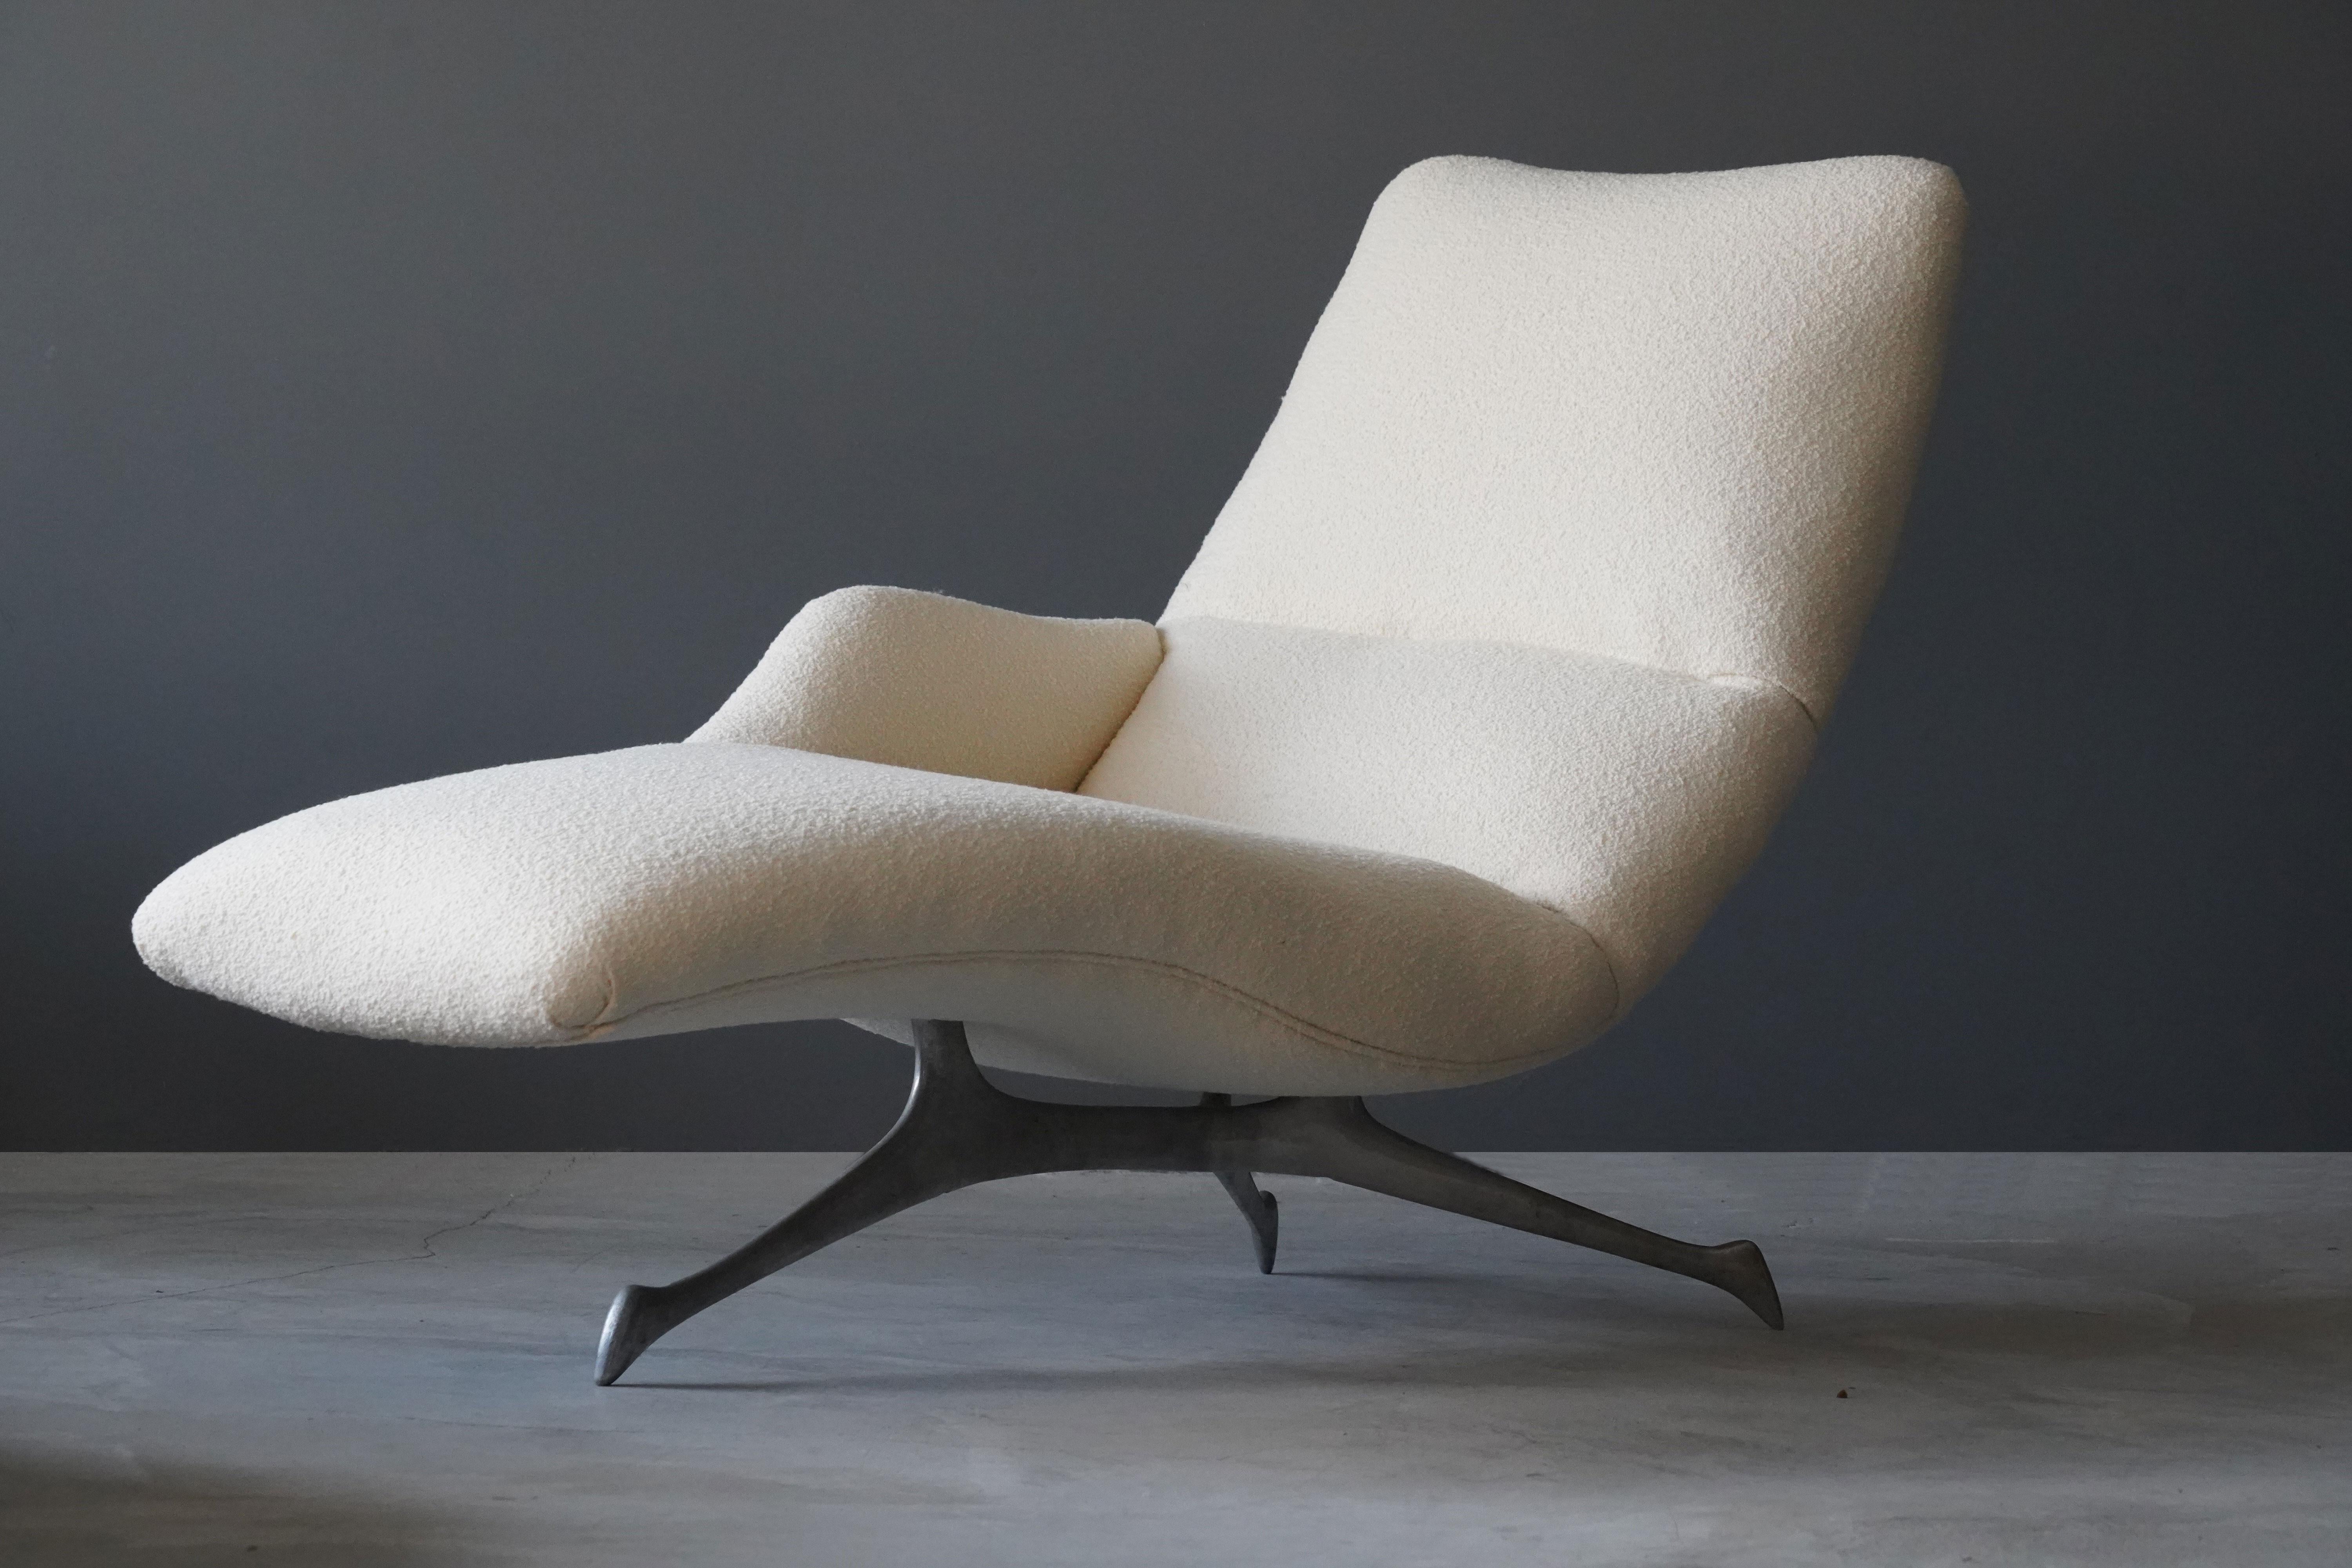 A rare 3-legged chaise lounge. Designed by Vladimir Kagan, and produced by Kagan-Dreyfuss, Inc.

Reupholstered in a brand new high-end bouclé fabric.

Other designers of the period include Gio Ponti, Isamu Noguchi, Paul Frankl, Jean Royere, and